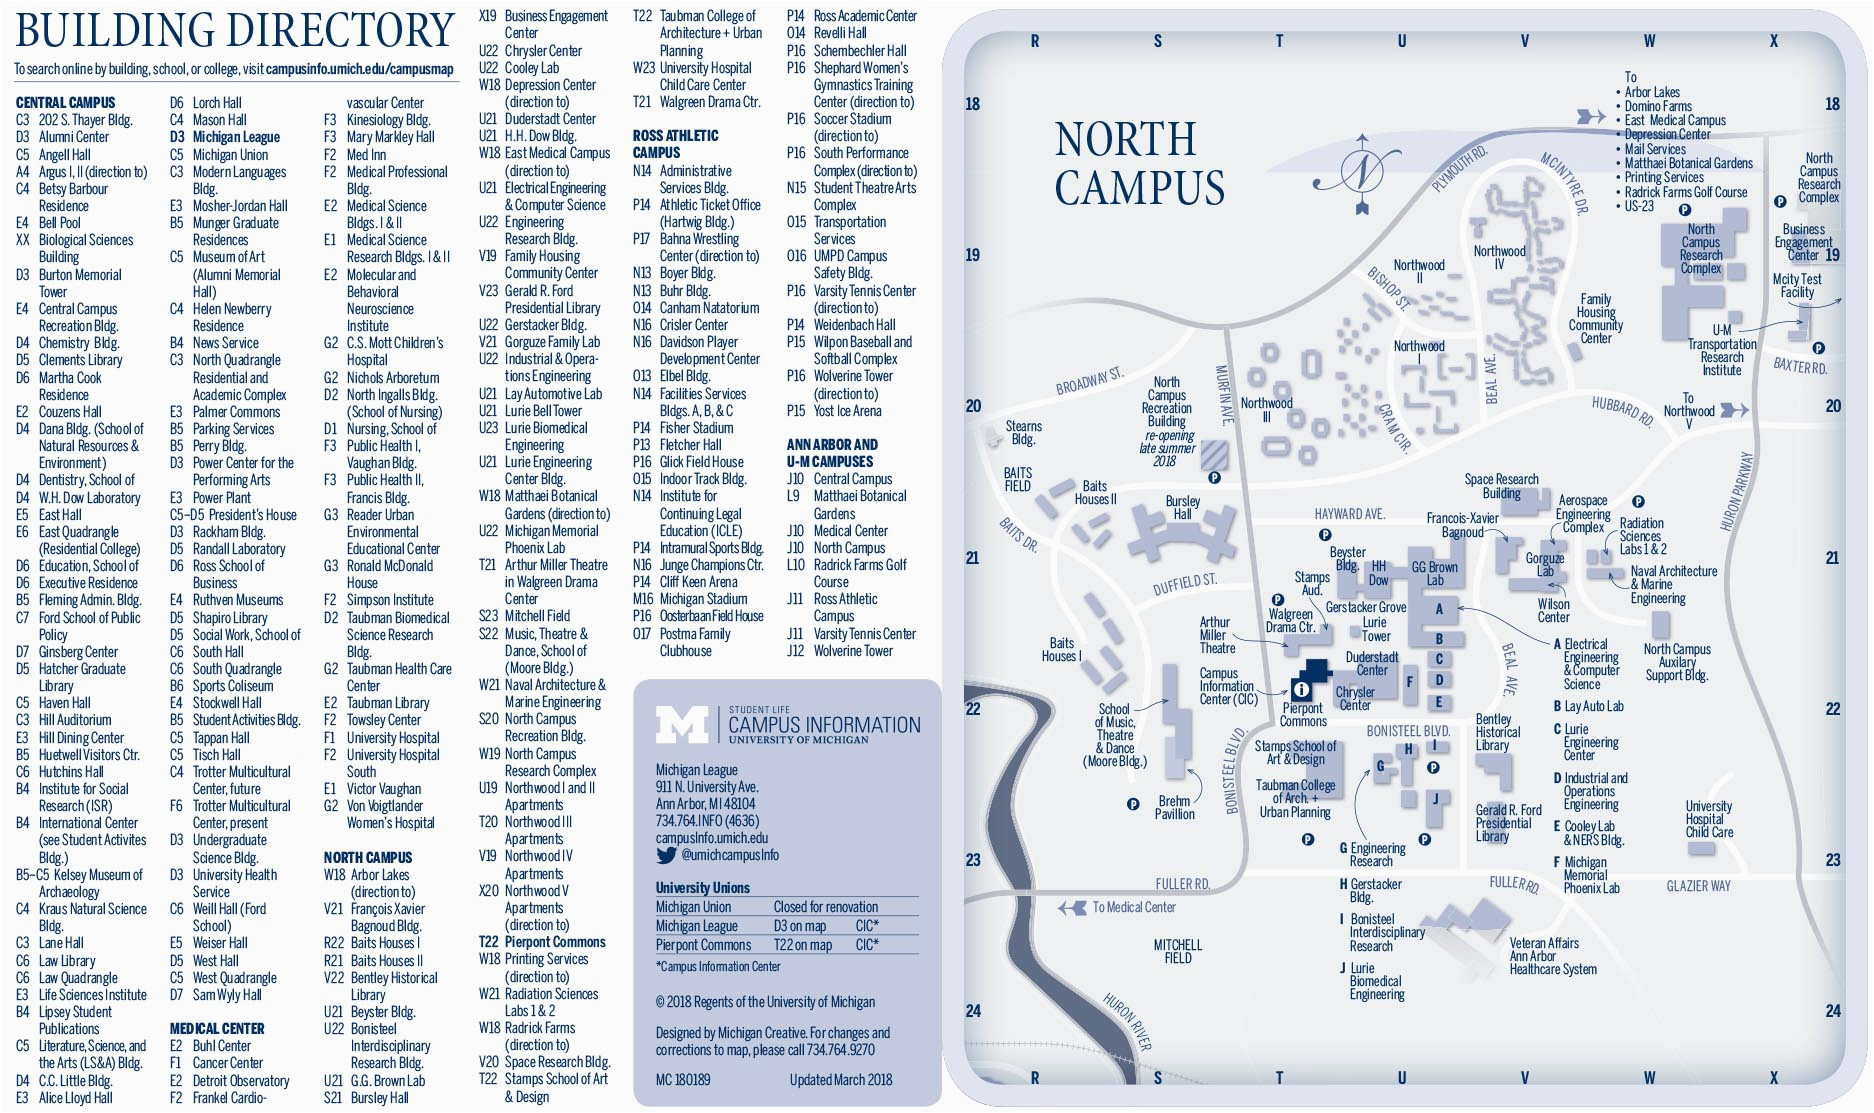 campus maps university of michigan online visitor s guide